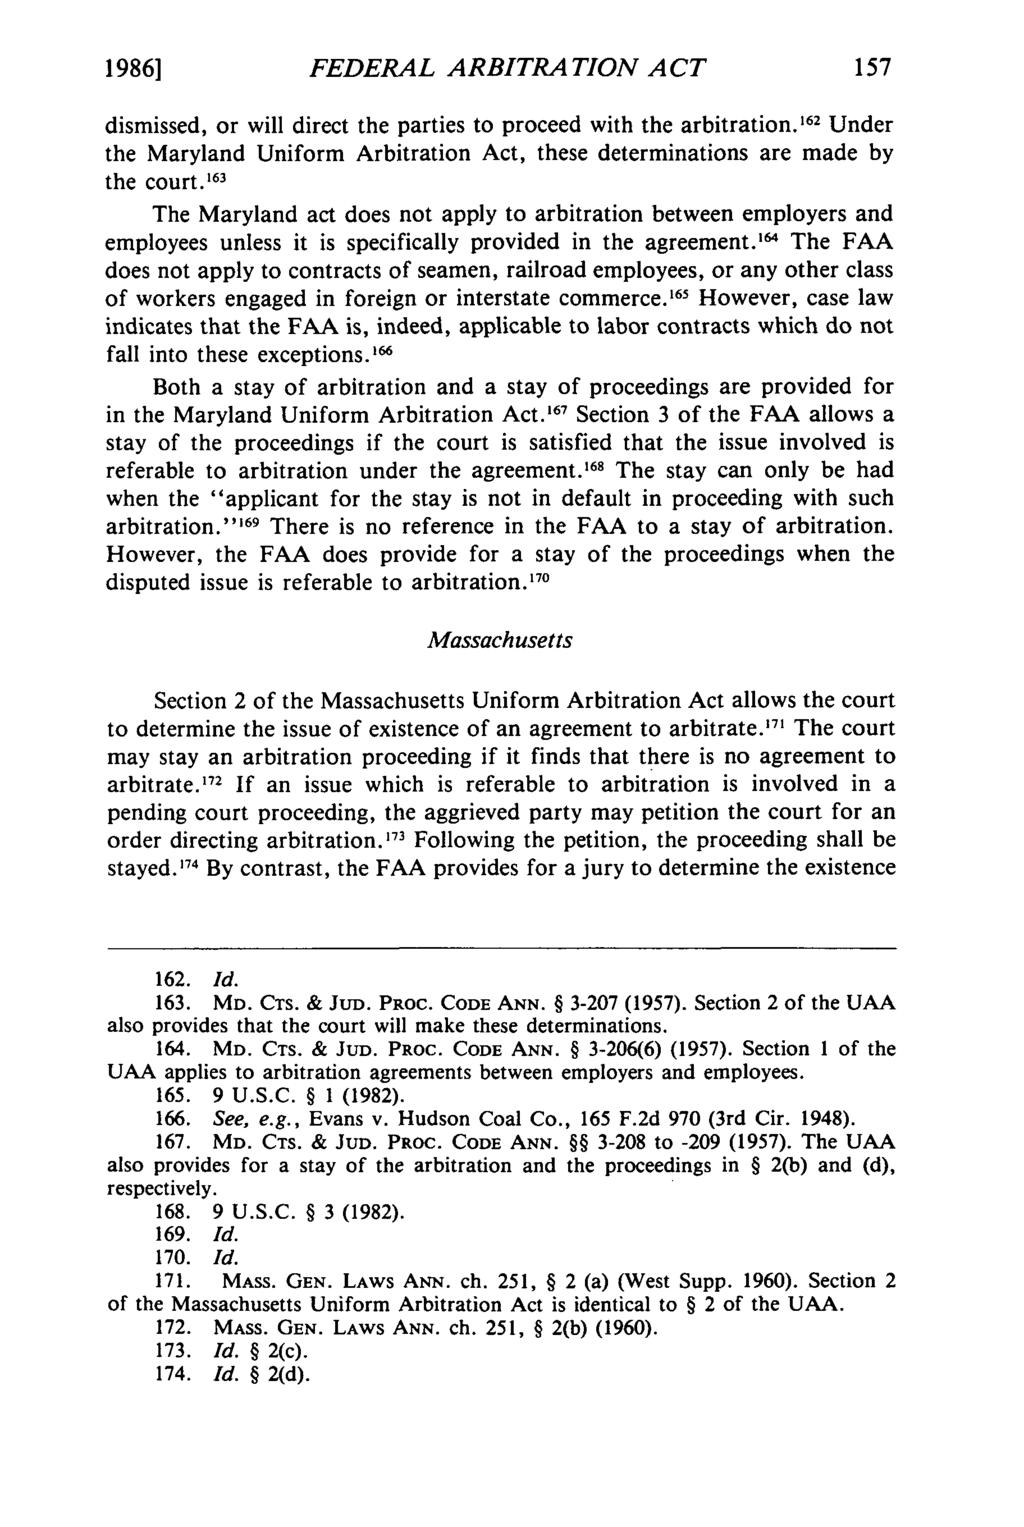 19861 et al.: Federal Arbitration Act Comparison FEDERAL ARBITRATION A CT dismissed, or will direct the parties to proceed with the arbitration.